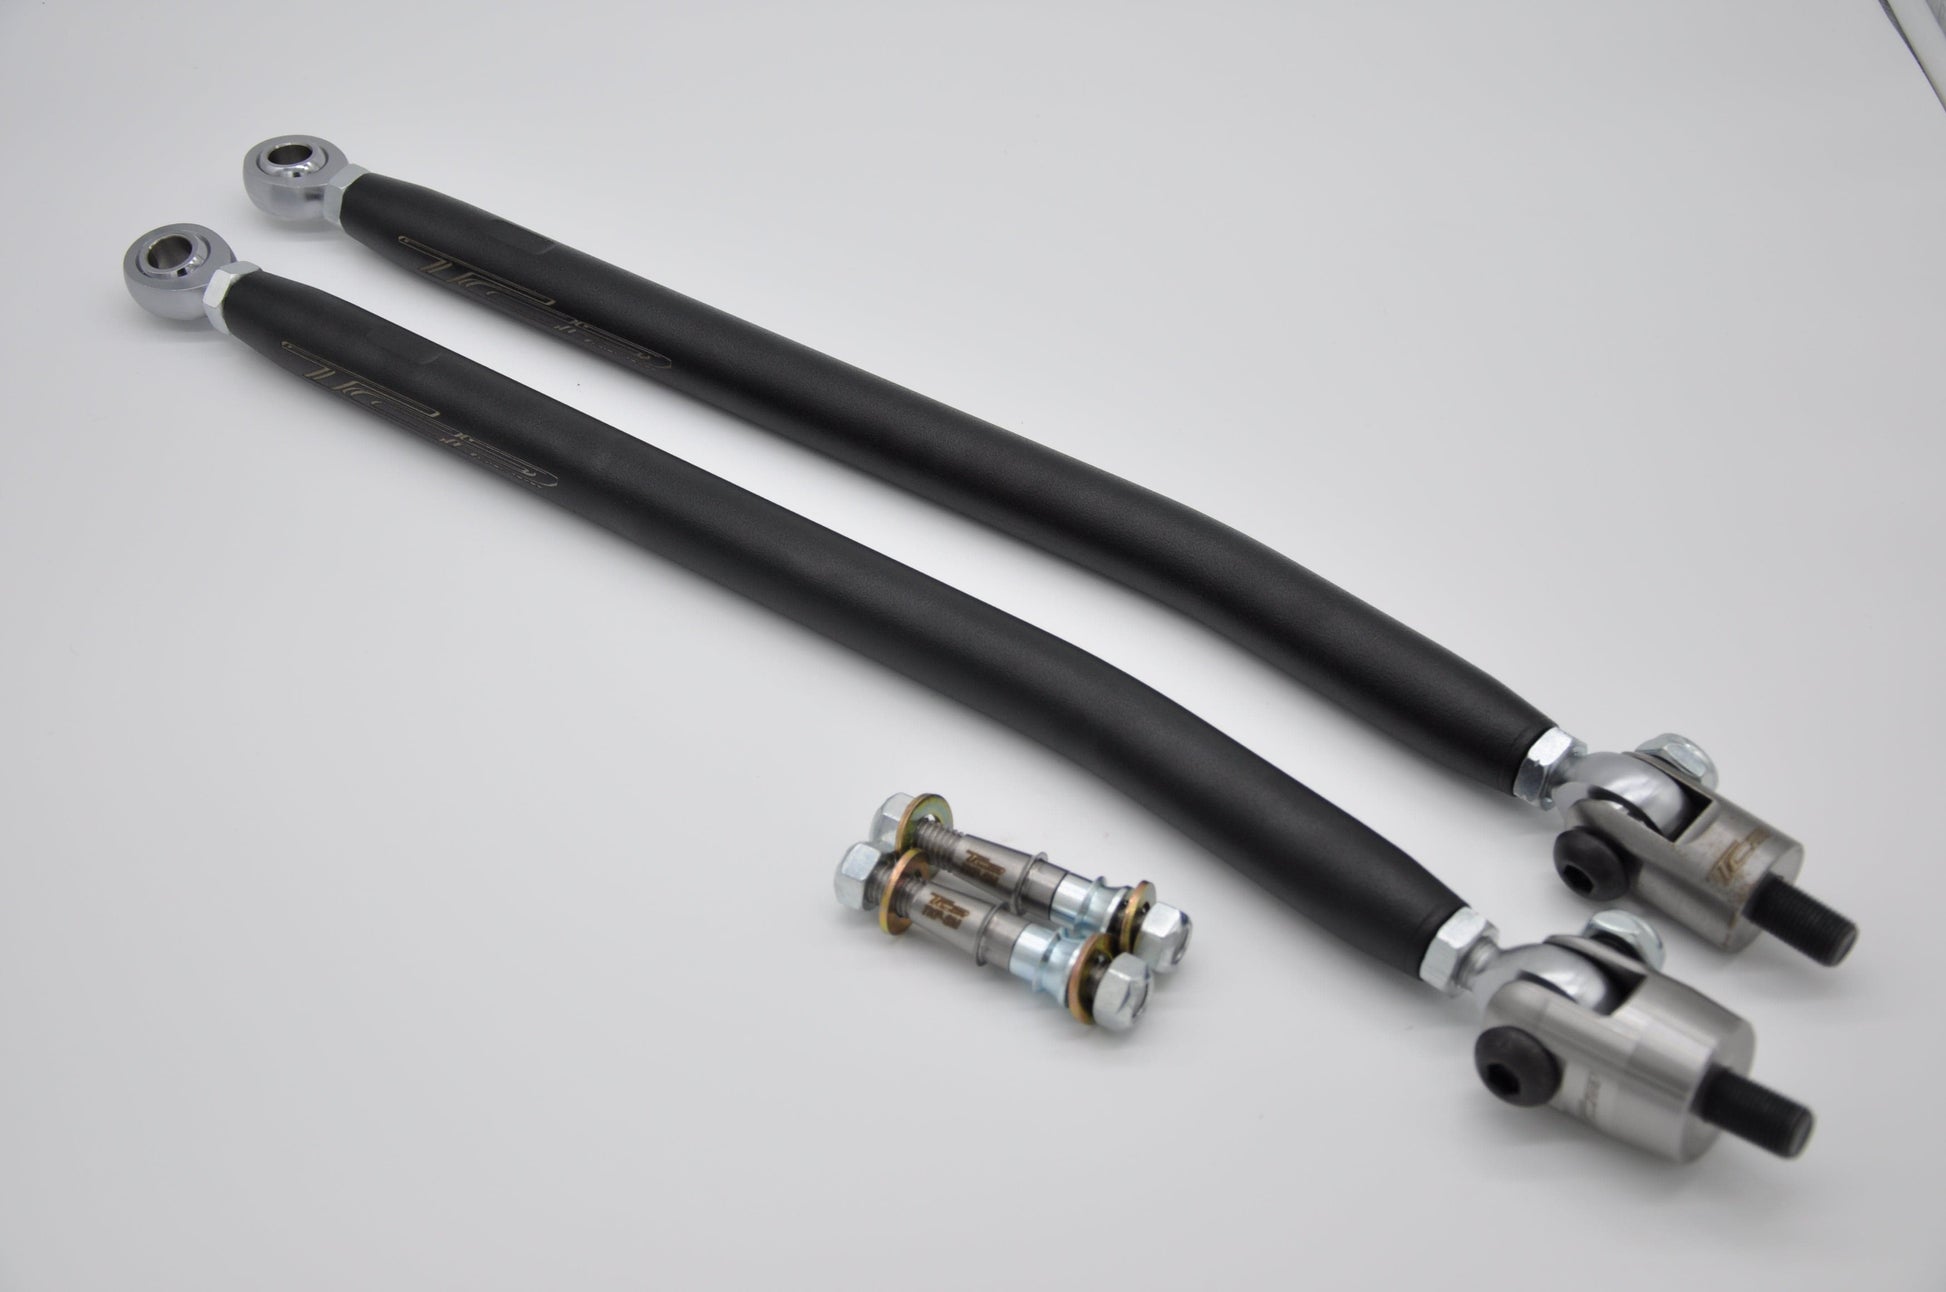 Heavy Duty Tie Rods, Full Kit with Tapered King Pins, Rod Ends, and Clevises for 2015-2018 Polaris RZR 1000 with SATV +10 Lift